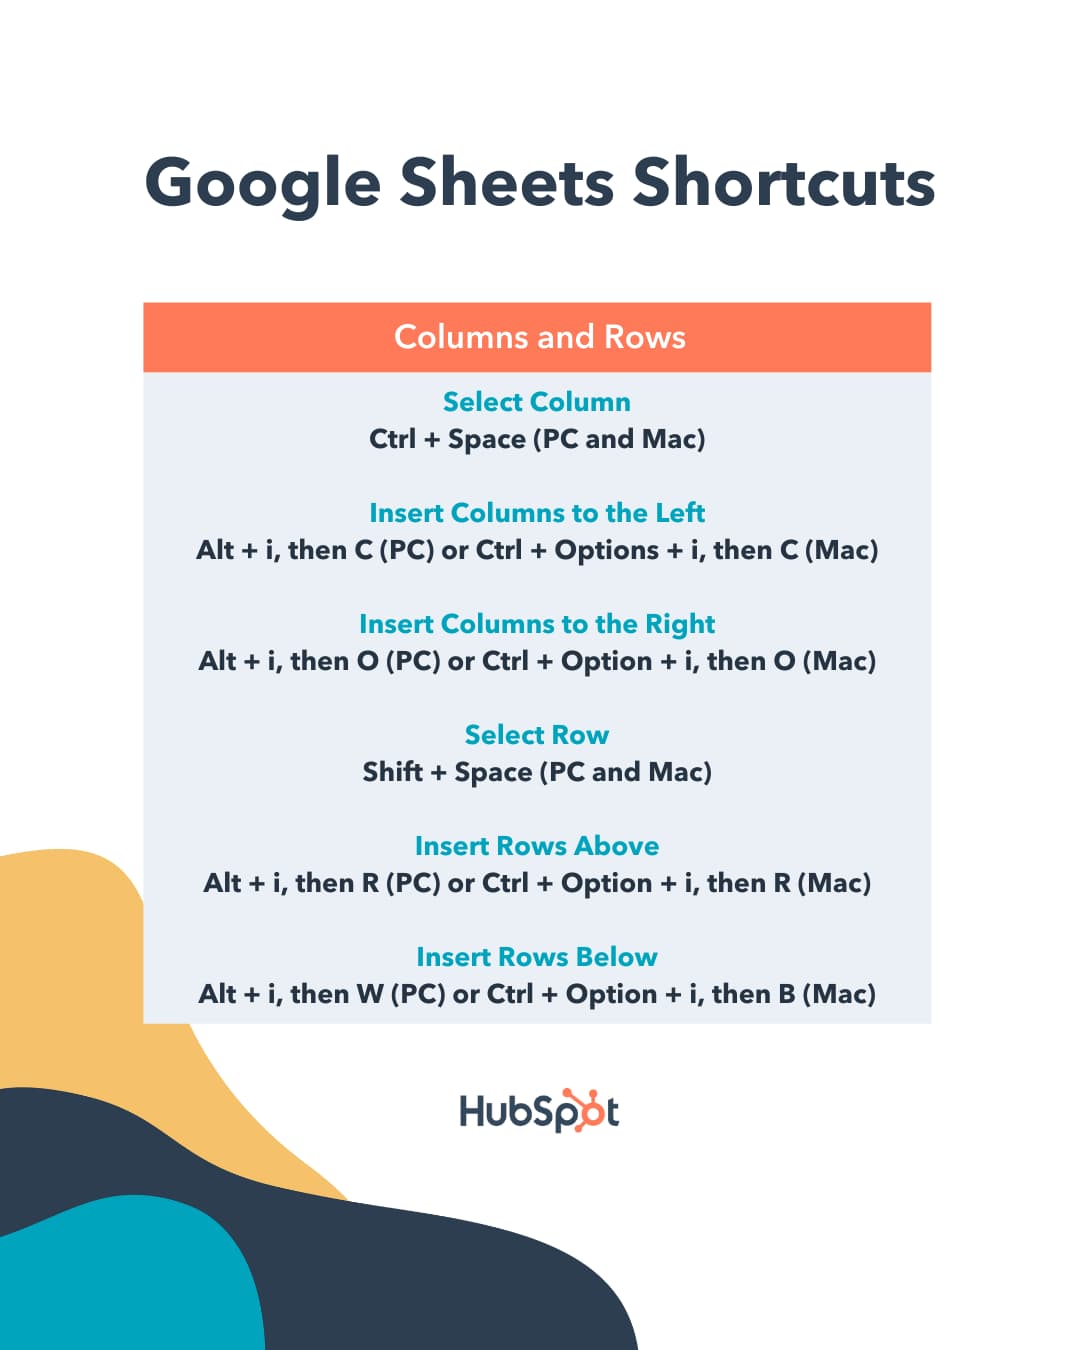 How to use Google Sheets Shortcuts to select columns, insert columns to the left or right, select row, and select rows above or below. 